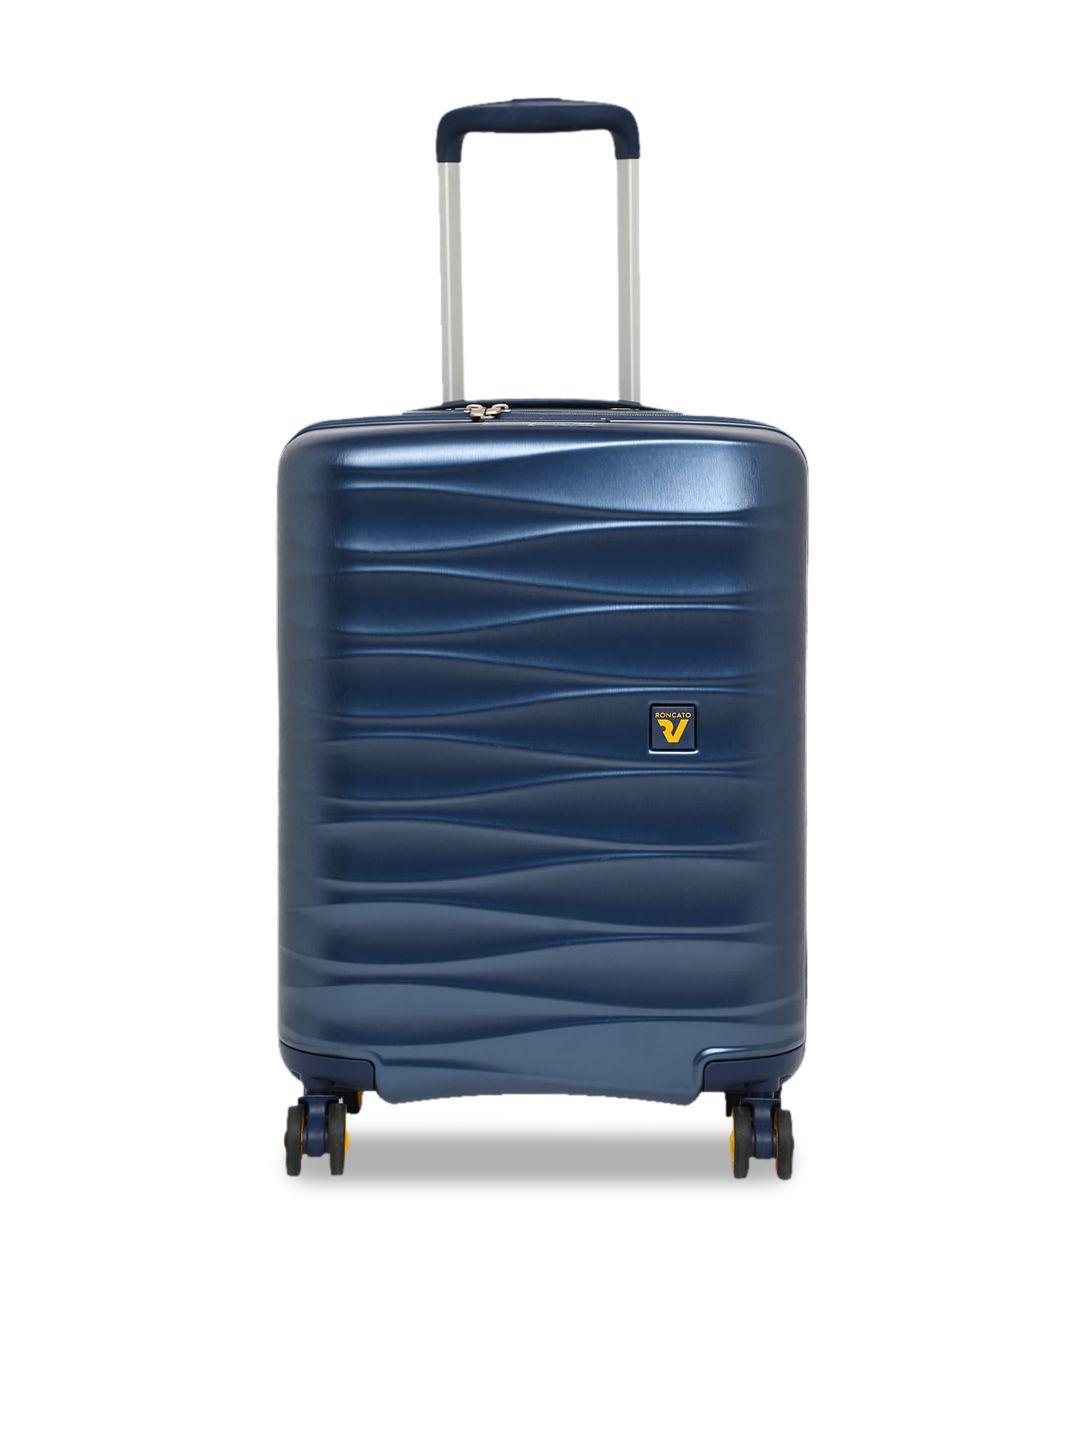 roncato blue textured 360 degree rotation 21 inch cabin trolley suitcase